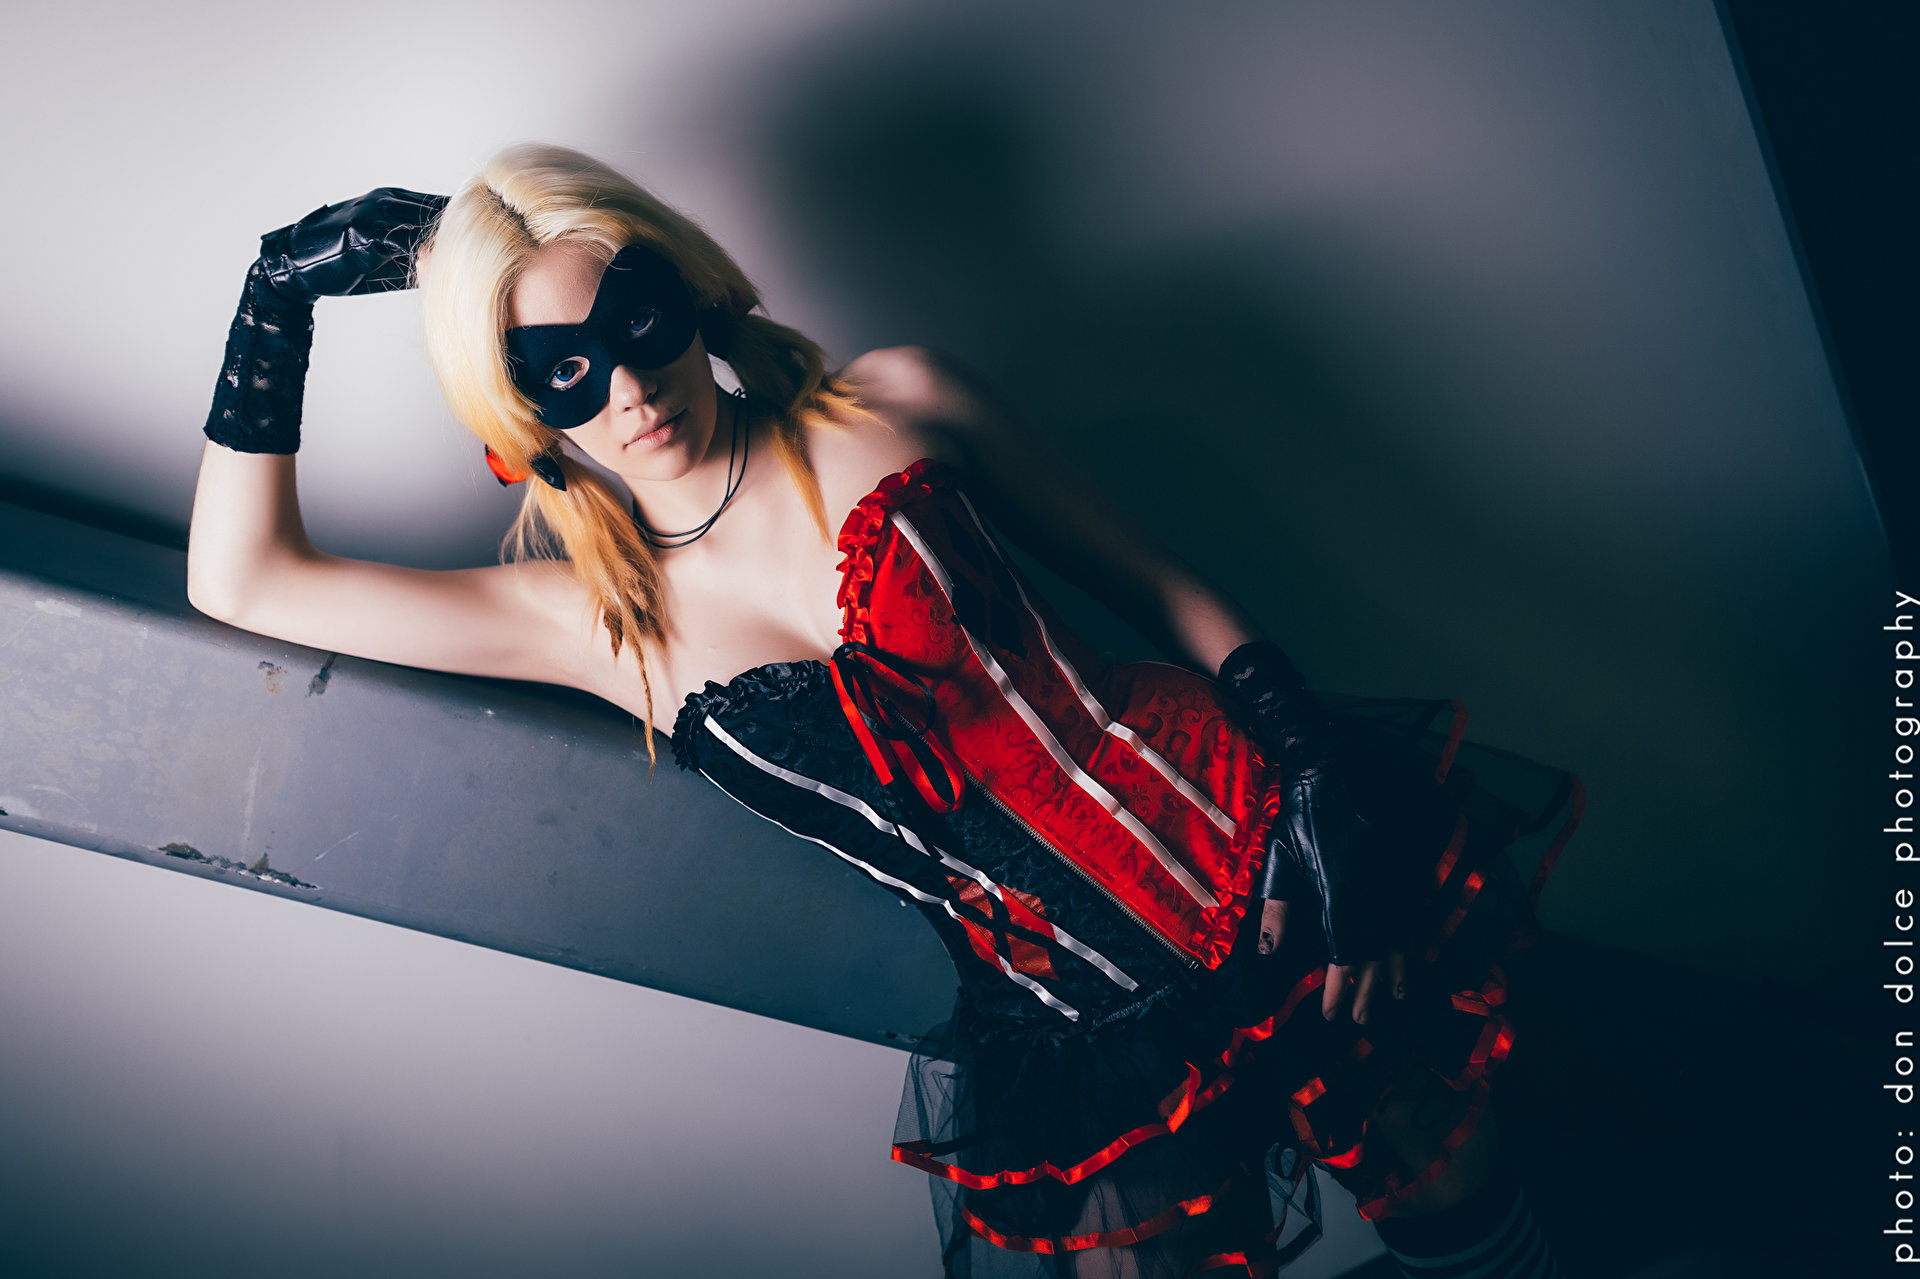 Cospix.net photo featuring Audrey Cosplay